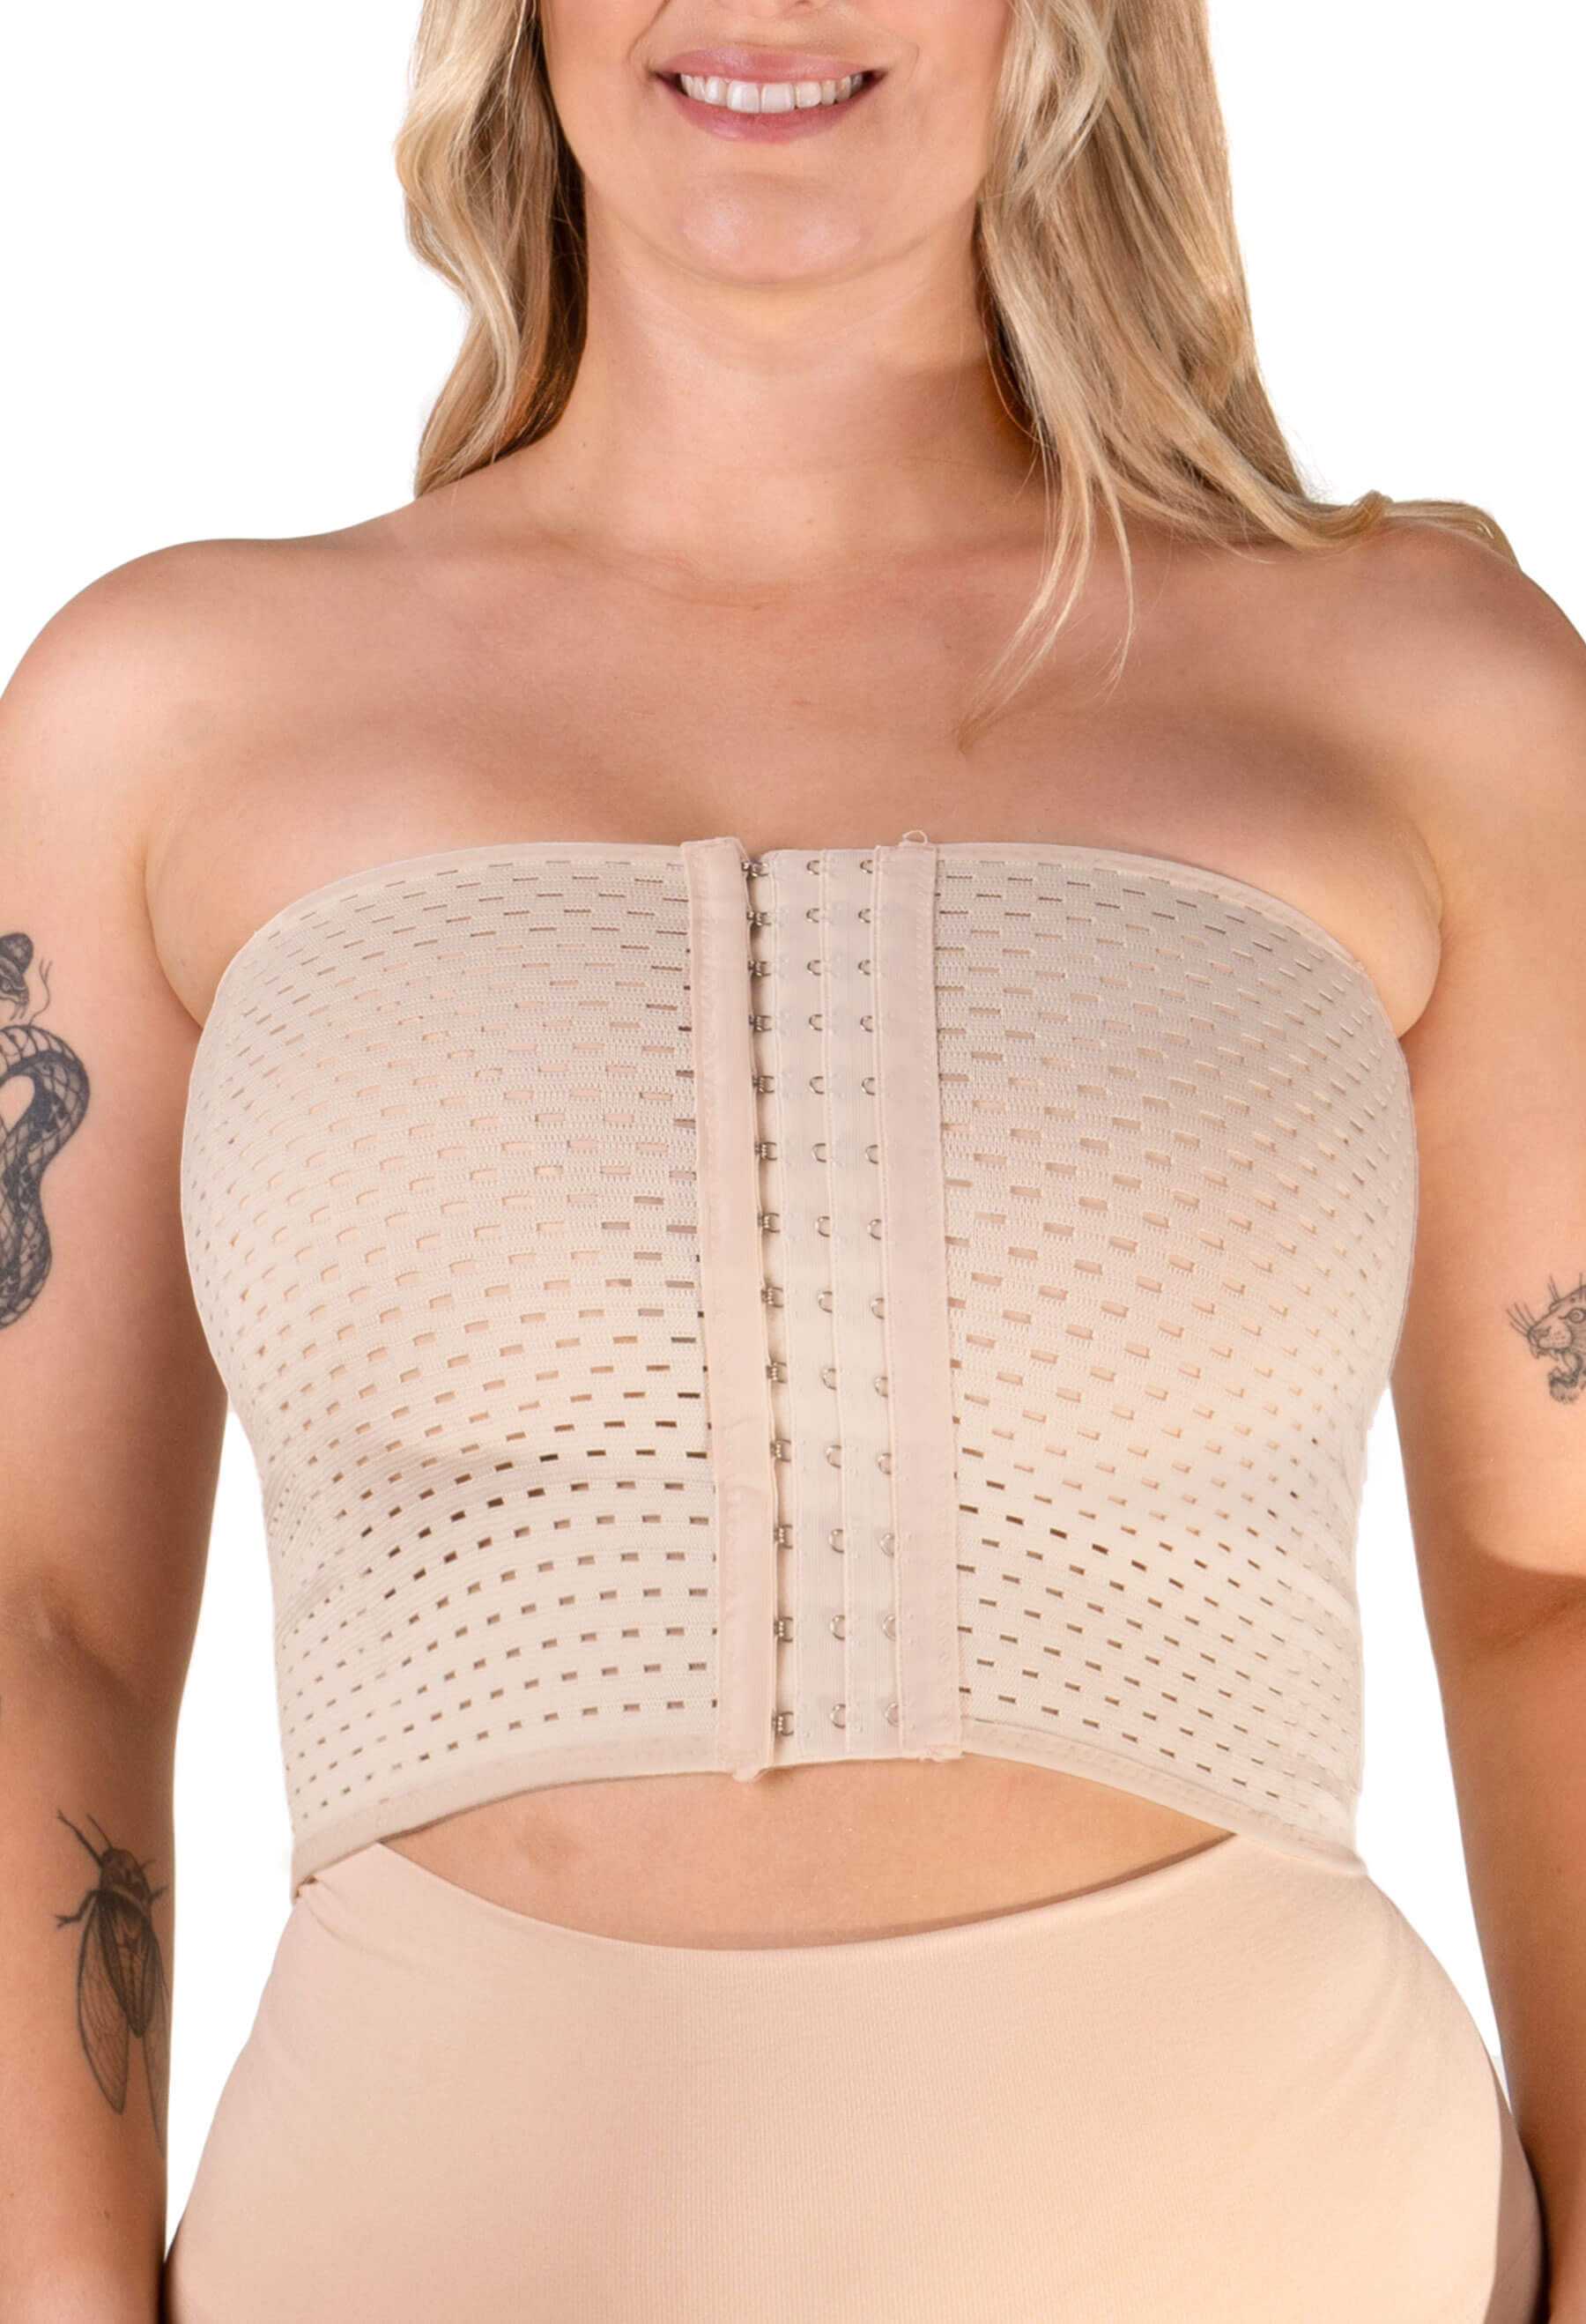 Bandeau Bra Top With Removable Straps. Organic Bamboo Super Soft